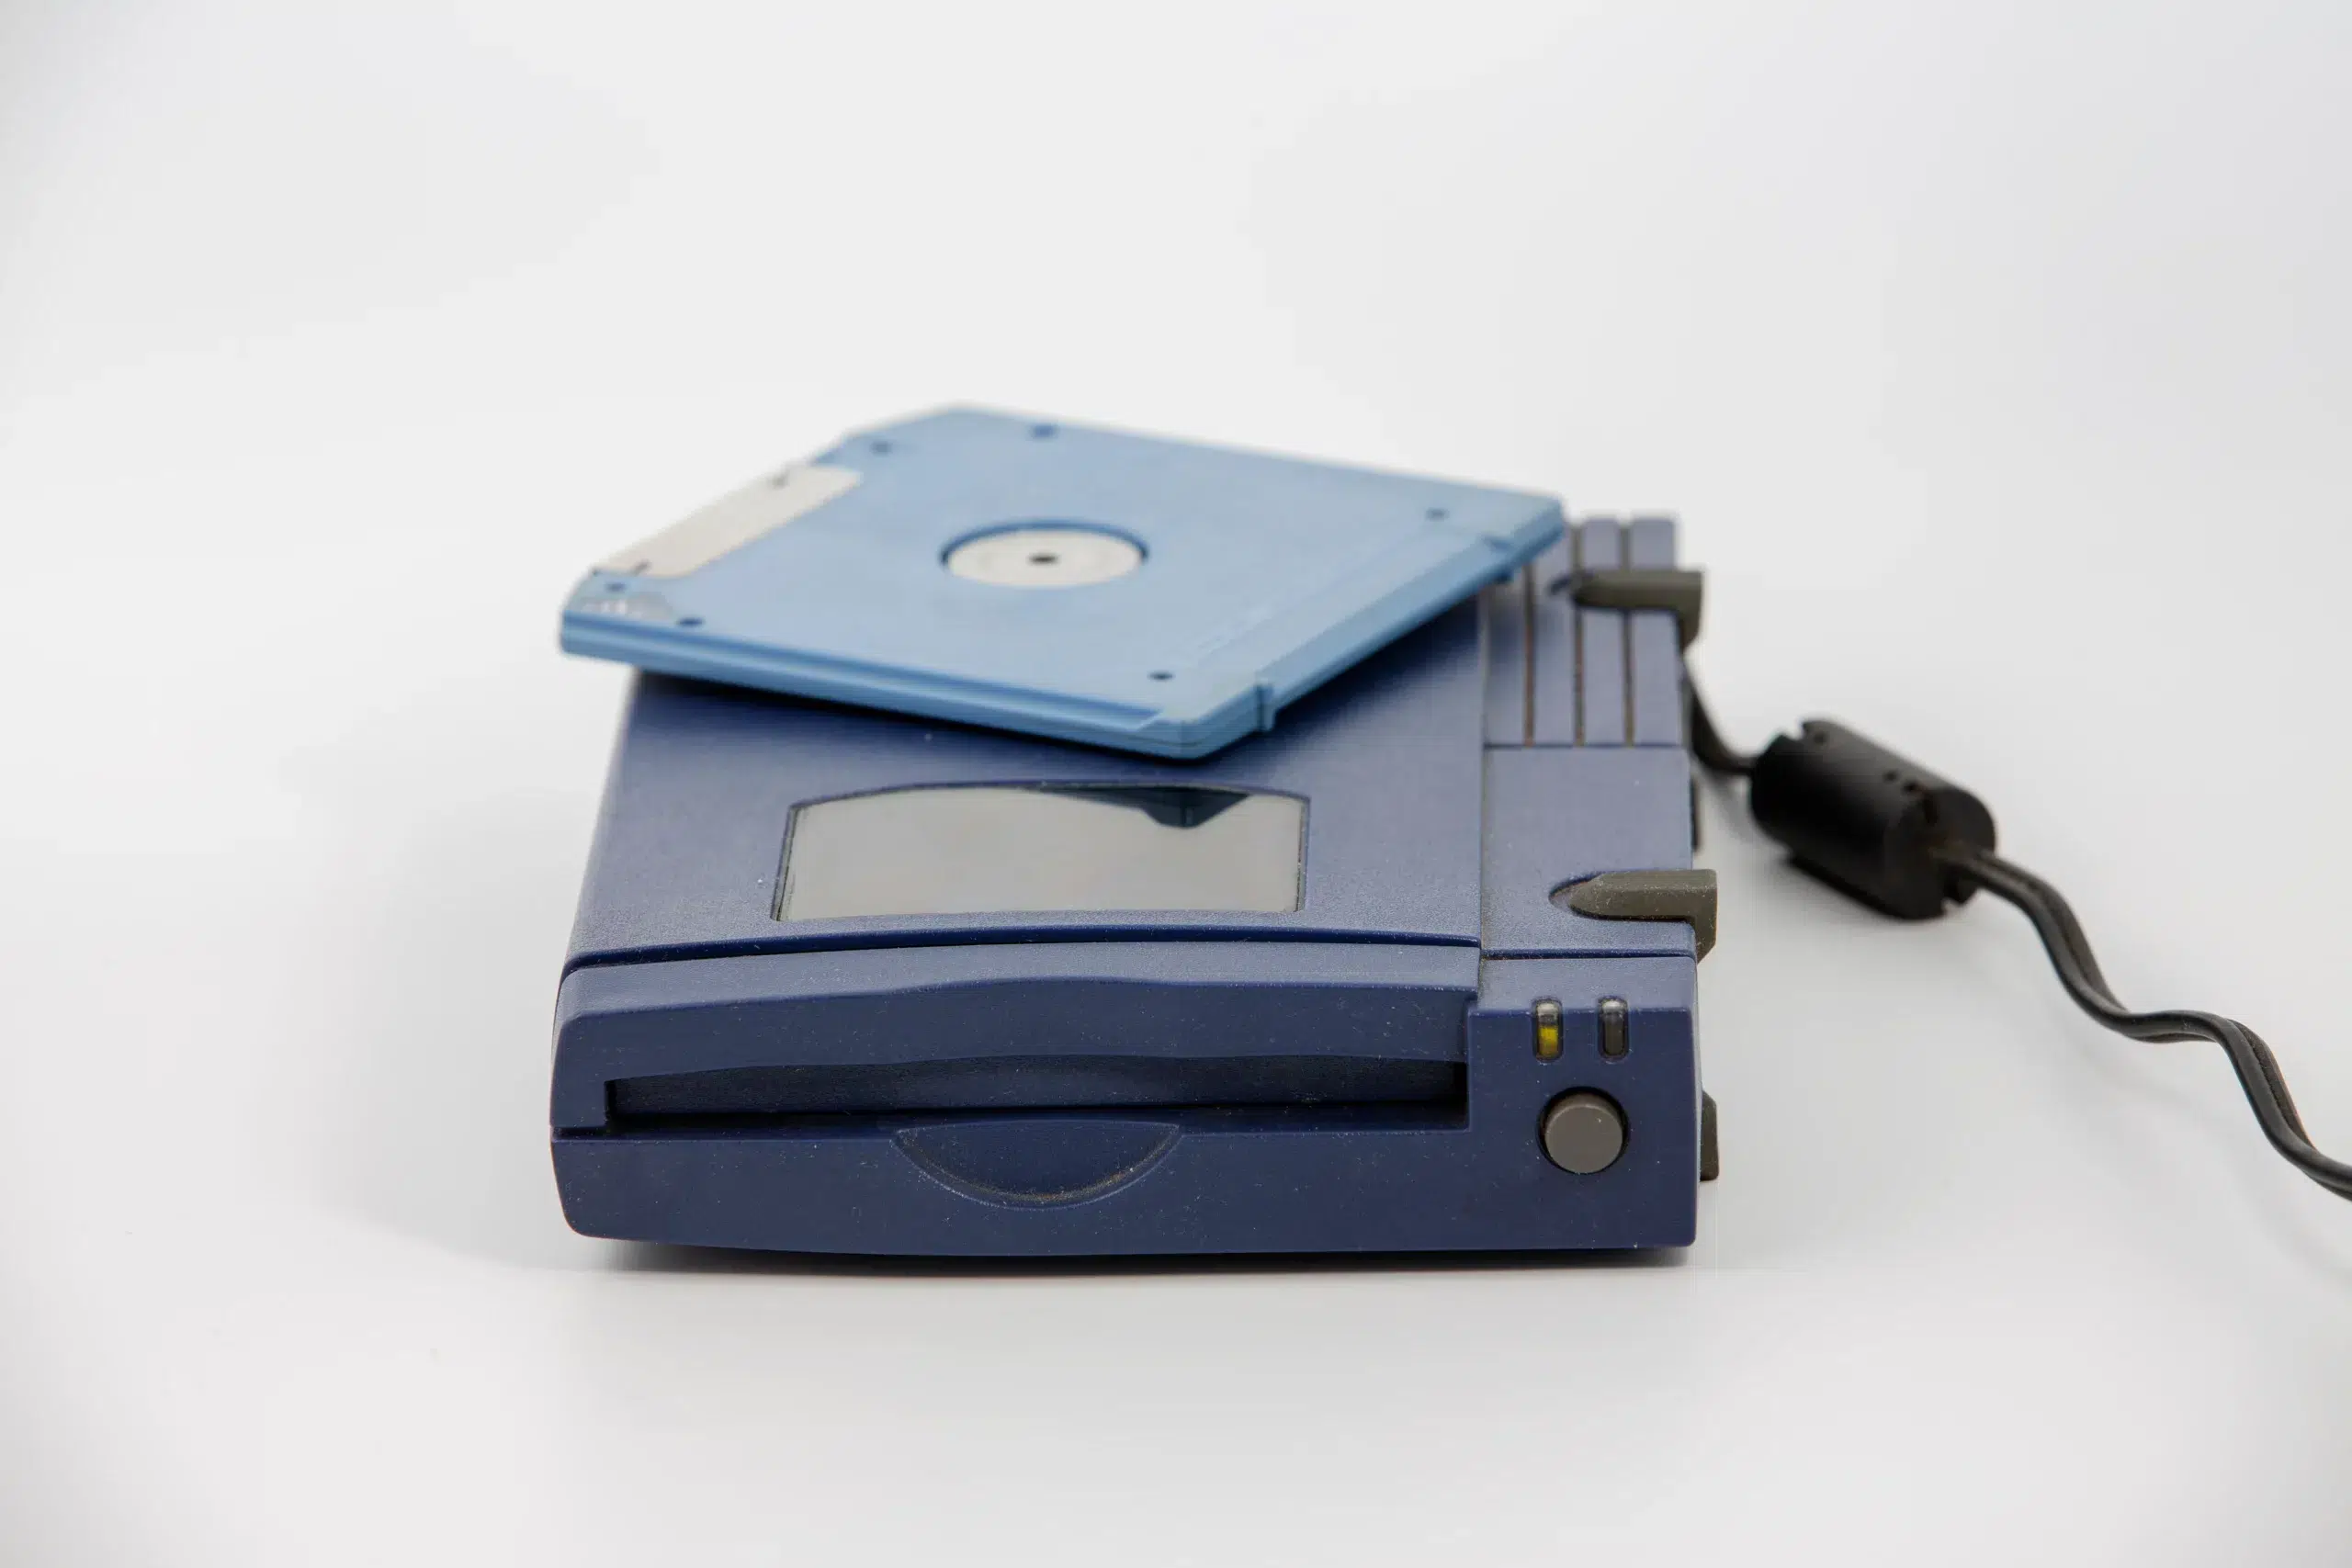 zip drive with blue disk inserted over white background